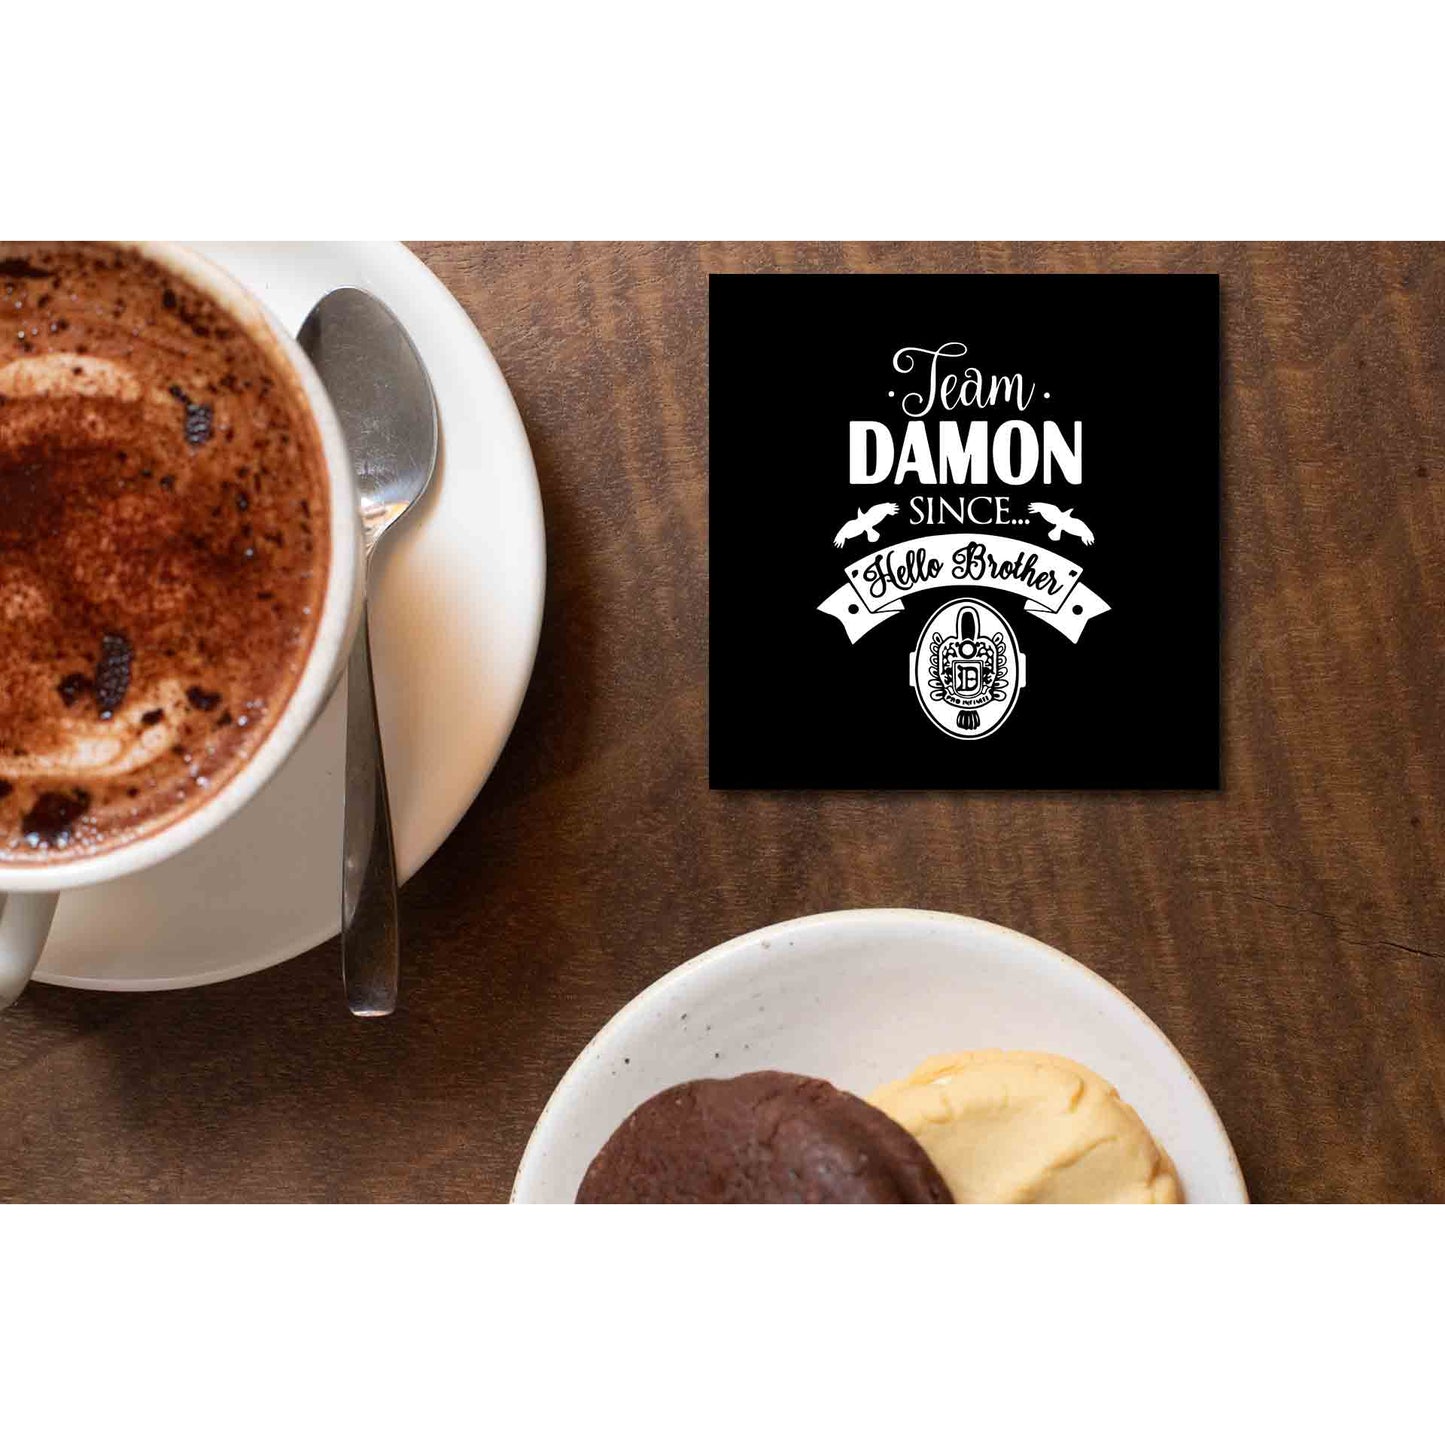 the vampire diaries team damon coasters wooden table cups indian tv & movies buy online india the banyan tee tbt men women girls boys unisex